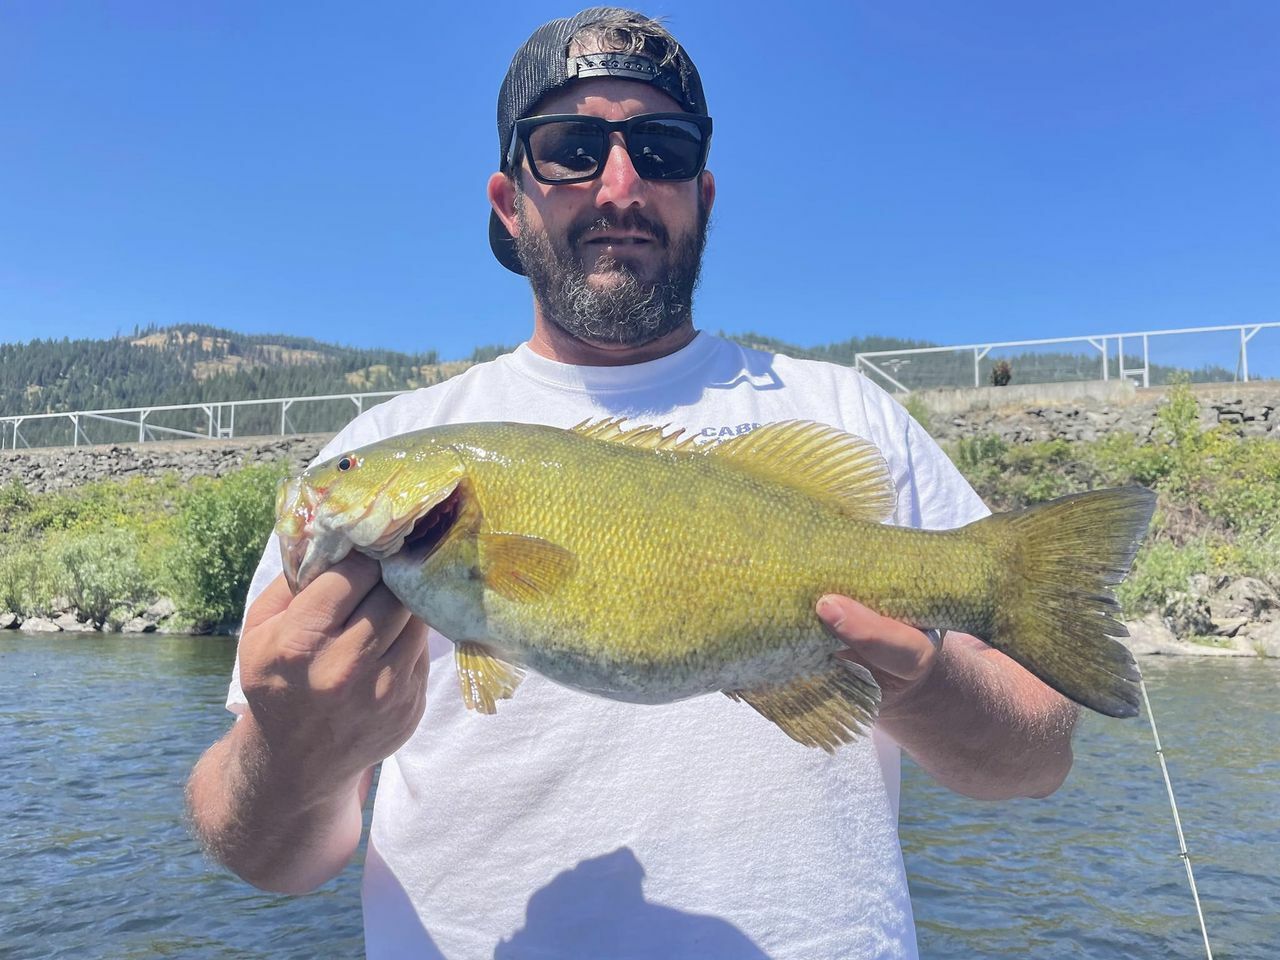 Smallmouth Bass fishing on the Clearwater River in Idaho is 🔥!